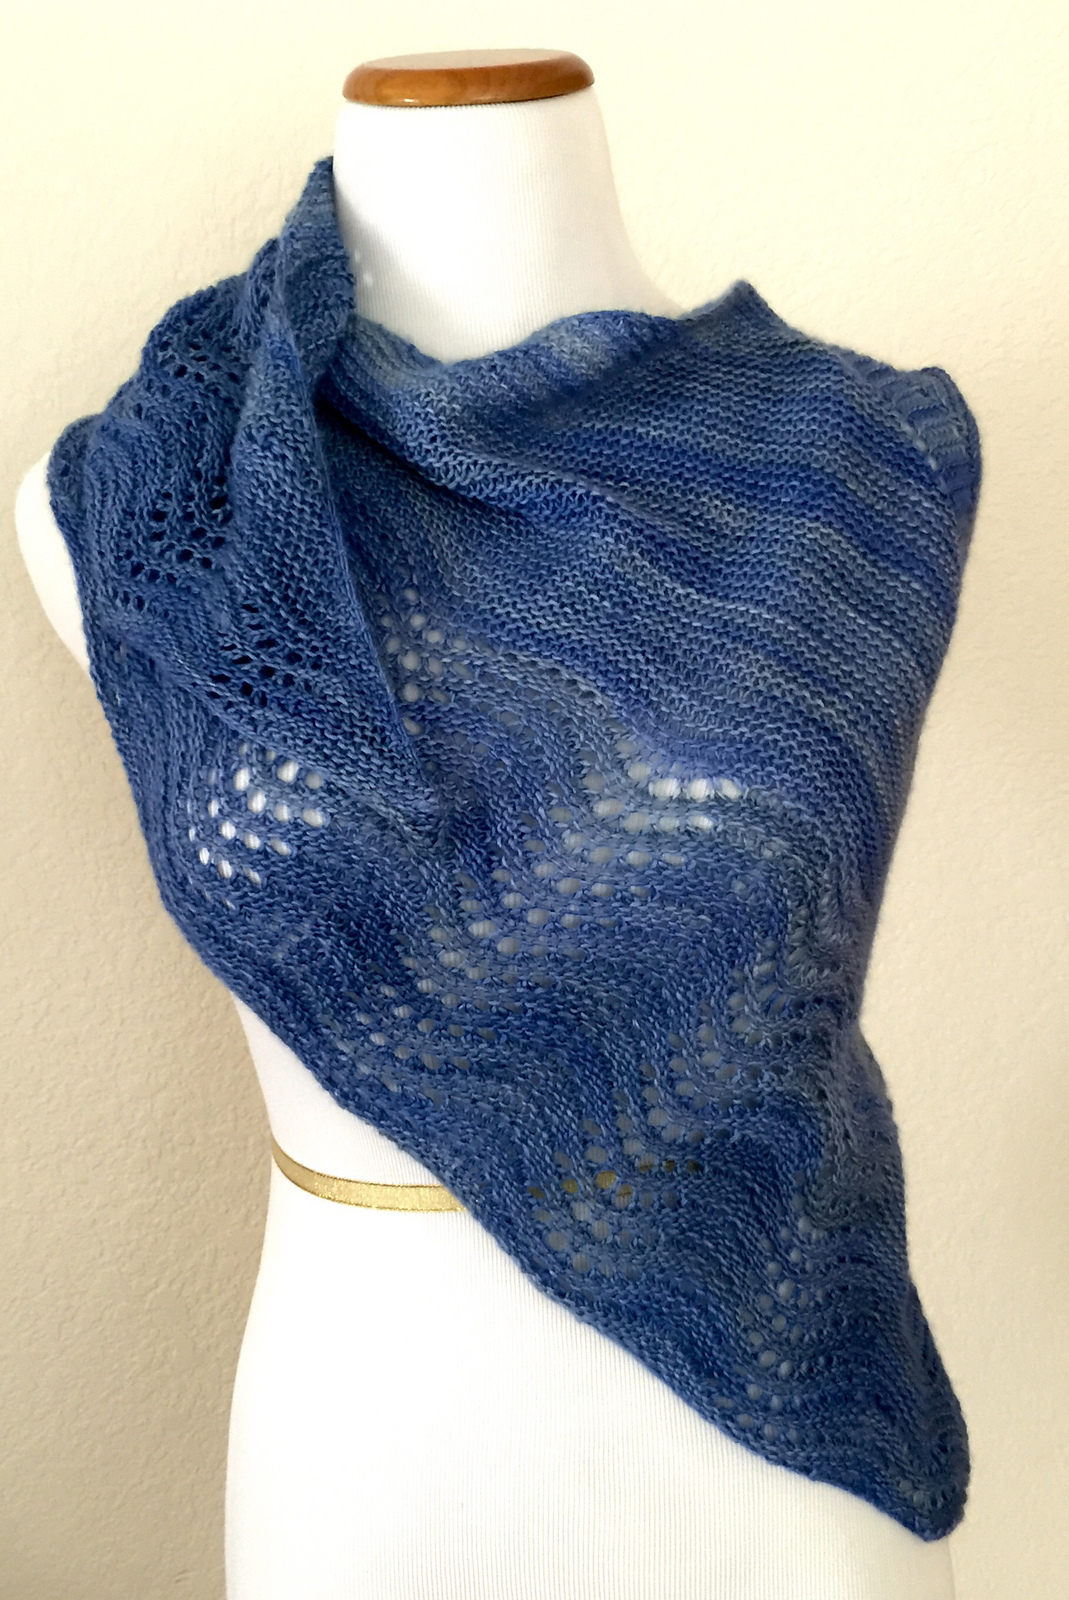 More Easy Shawl Knitting Patterns | In the Loop Knitting